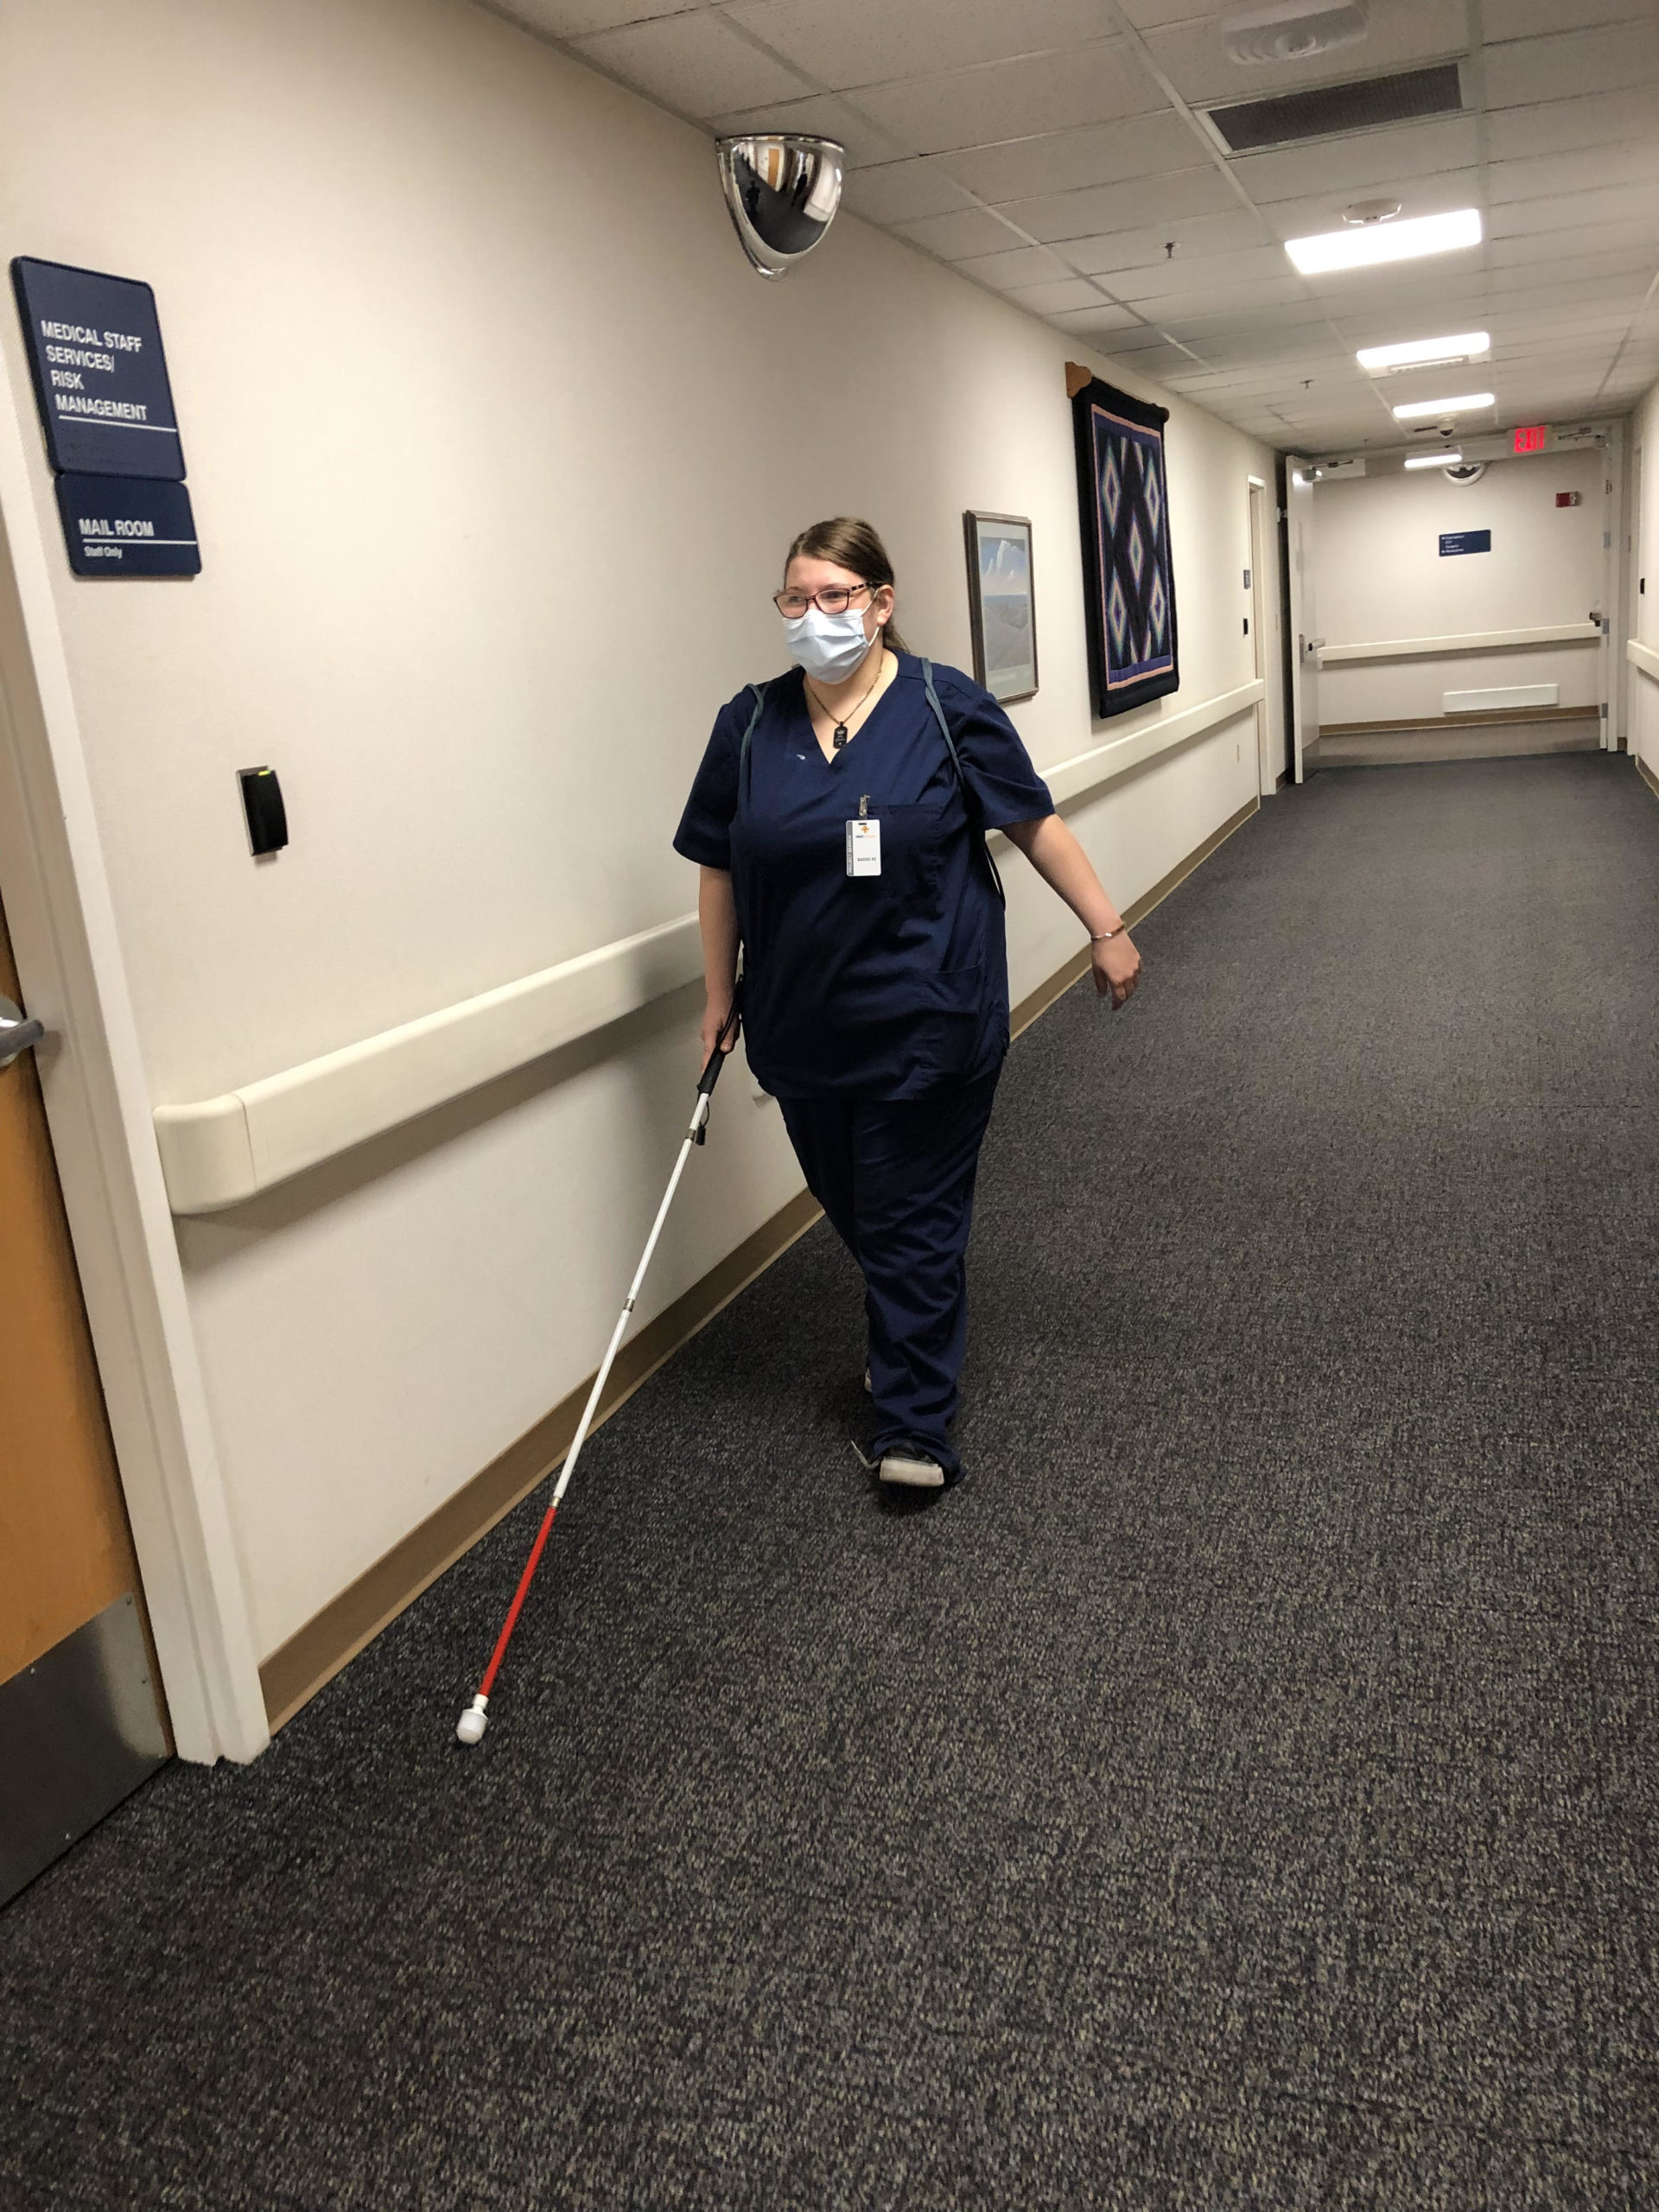 student wearing navy blue scrubs, backpack, name badge, and holding a white cane walking down an empty hallway